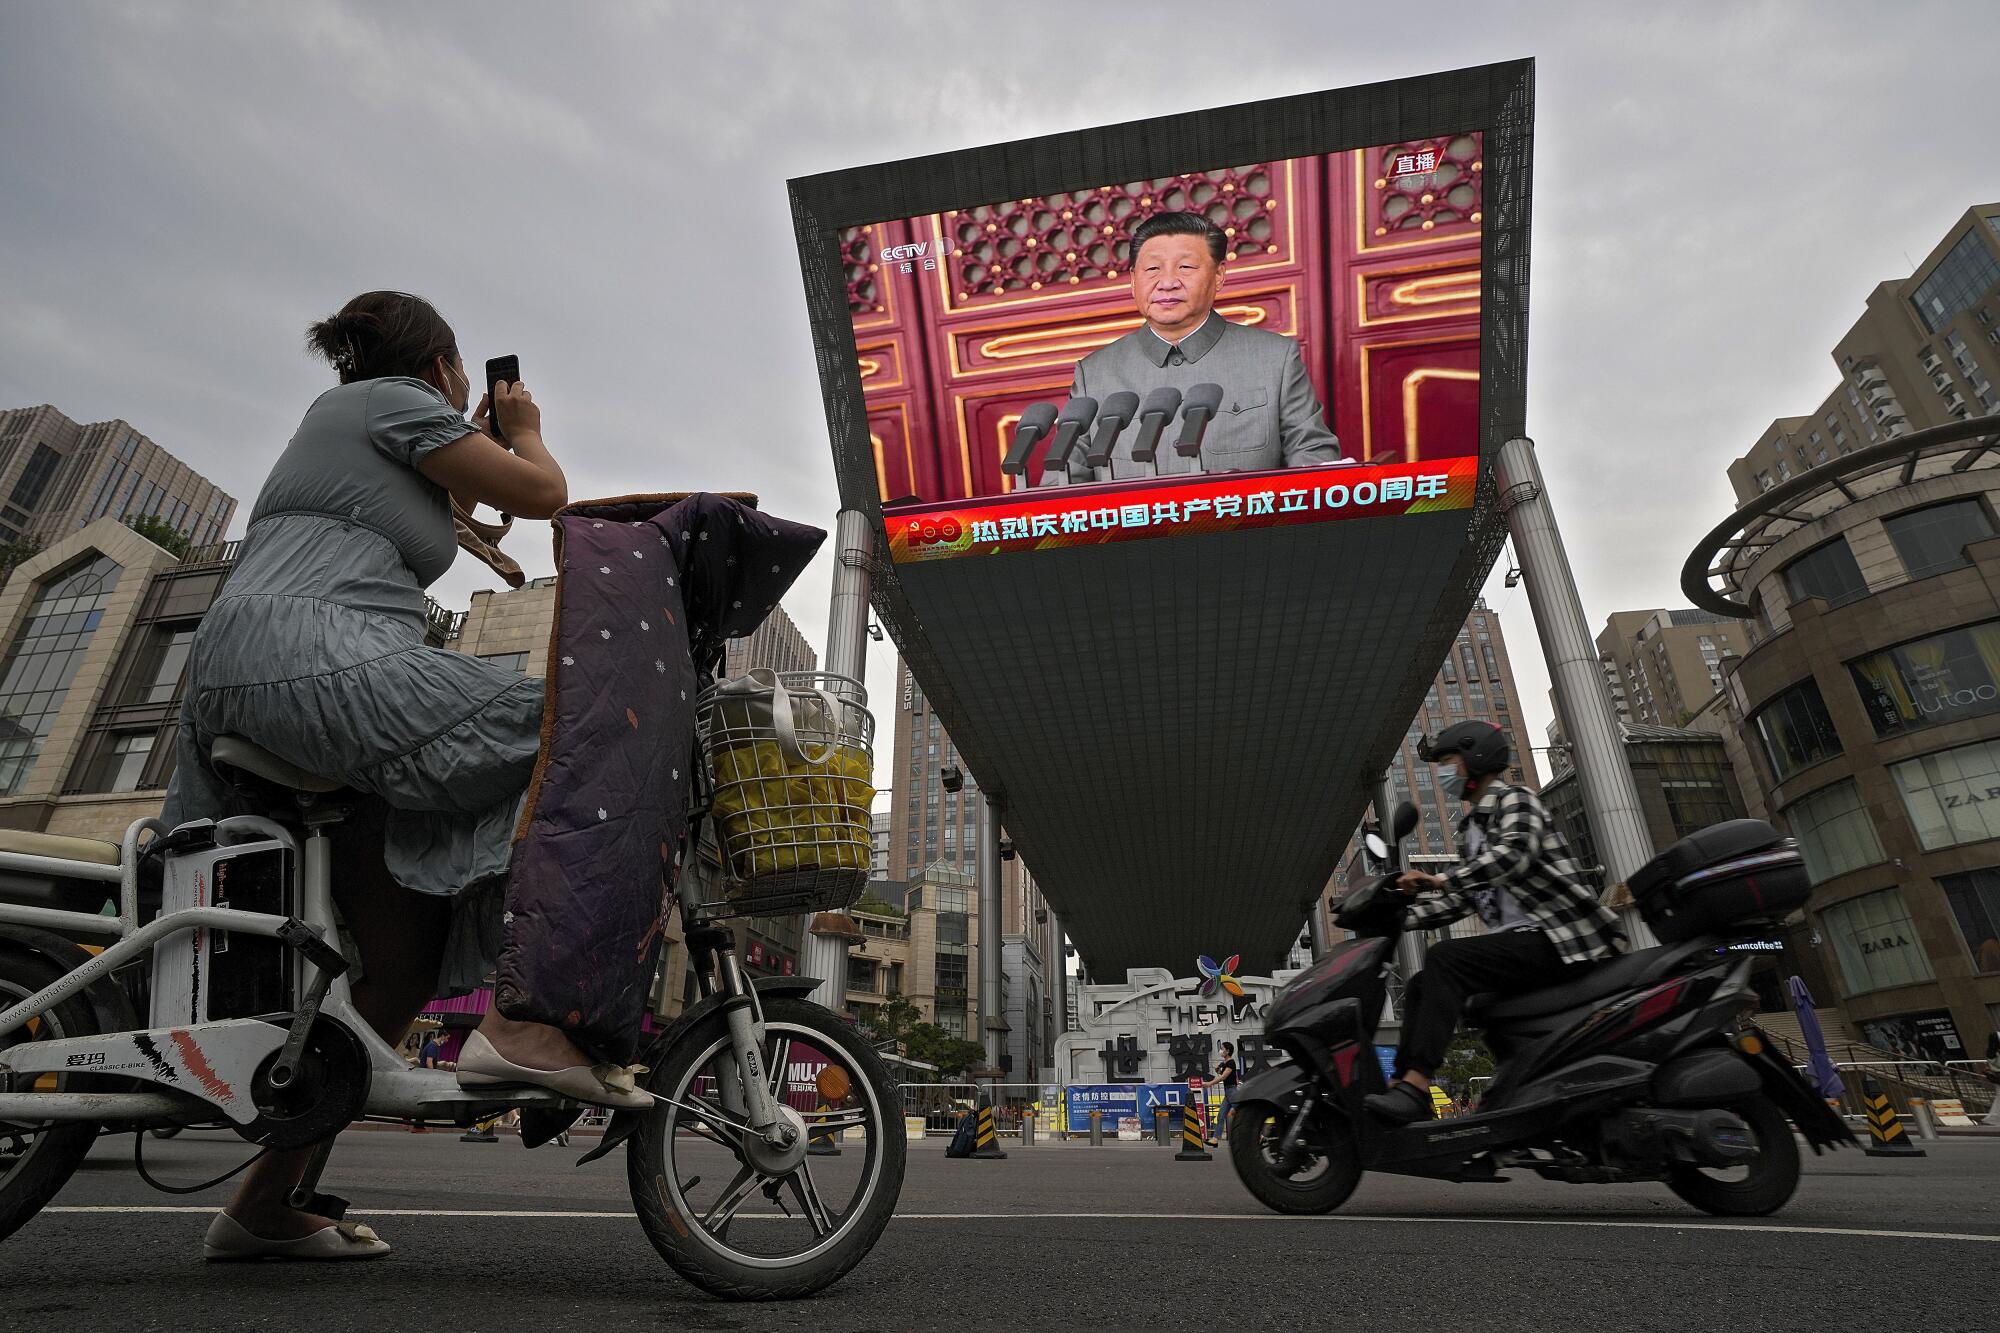 A woman on her electric-powered scooter films a large video screen showing Chinese President Xi Jinping.